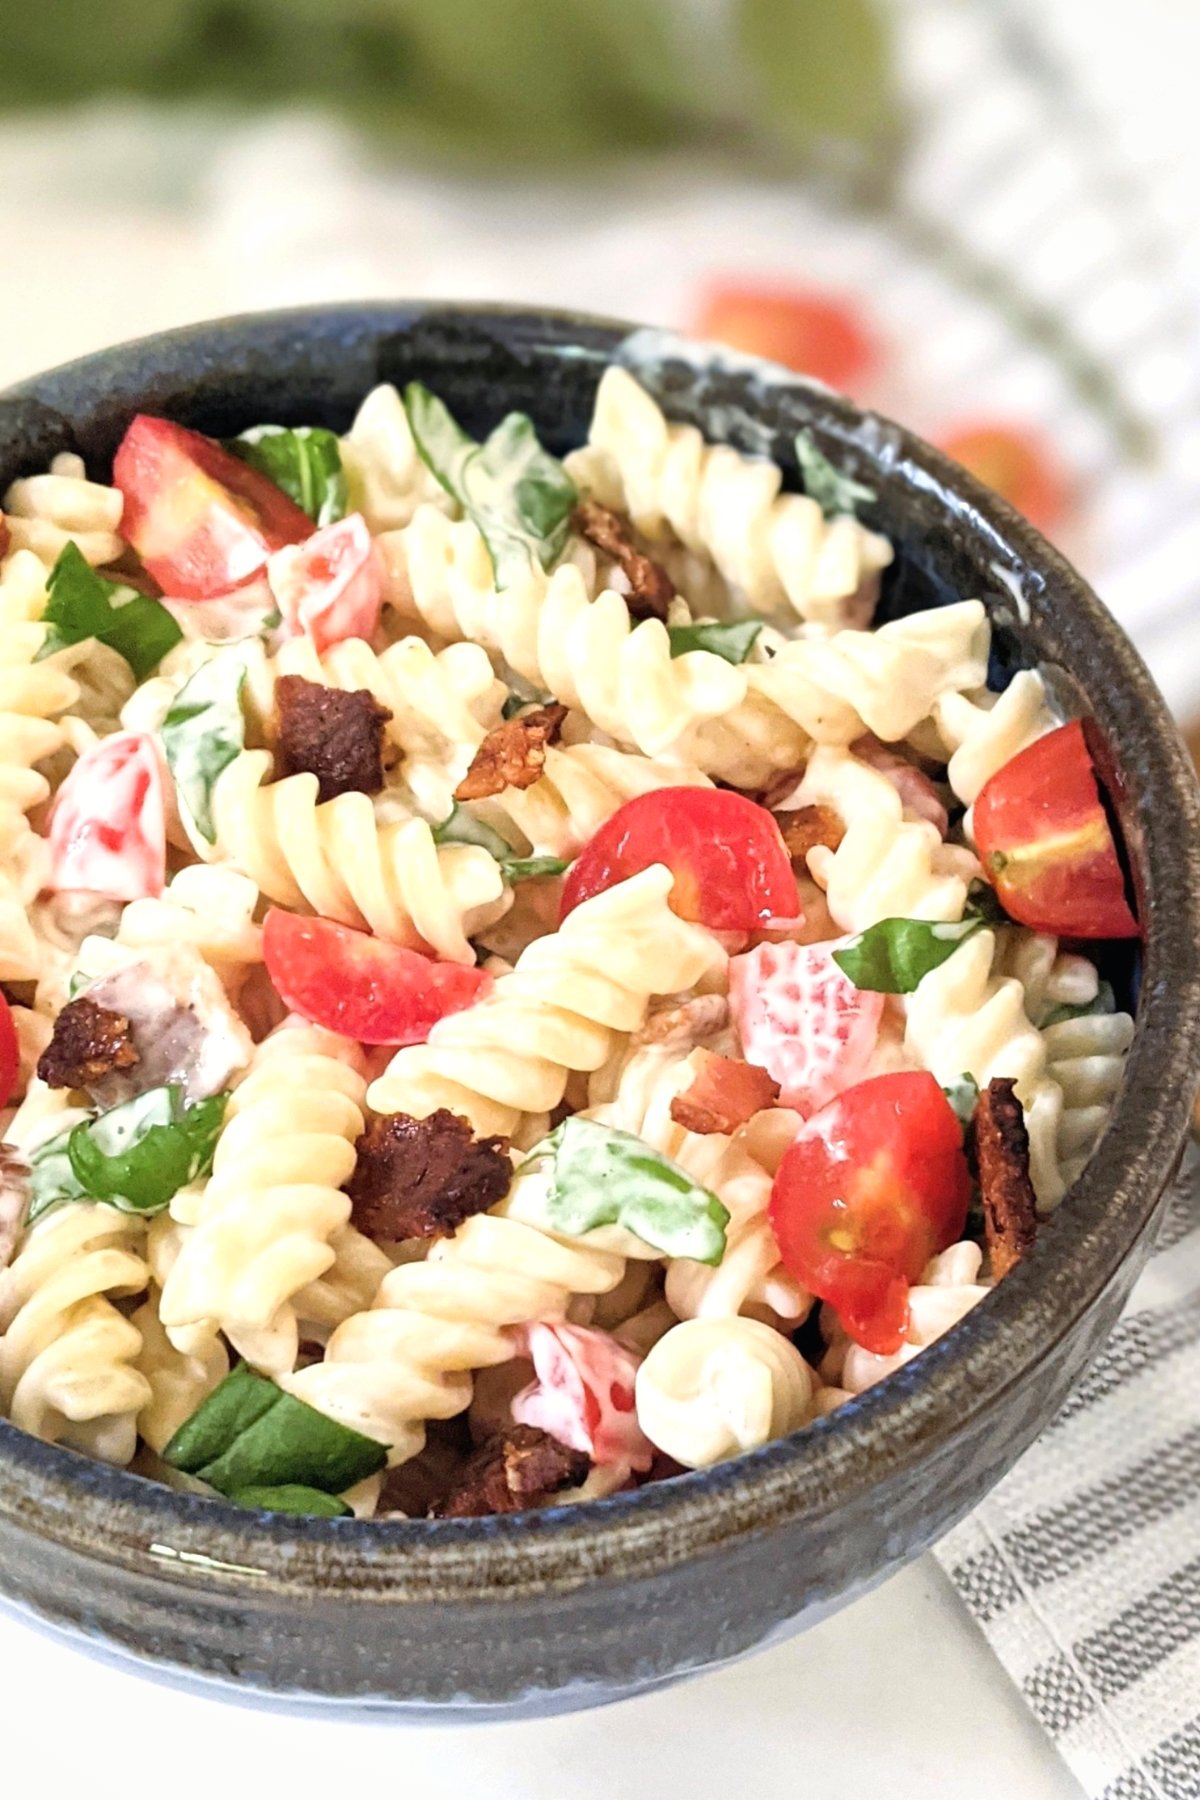 blt pasta salad with ranch dressing recipe for summer bbq side dish creamy salads fun party favorite recipes for memorial day bbq recipes side dishes for 4th of july cookouts and summer entertaining recipes